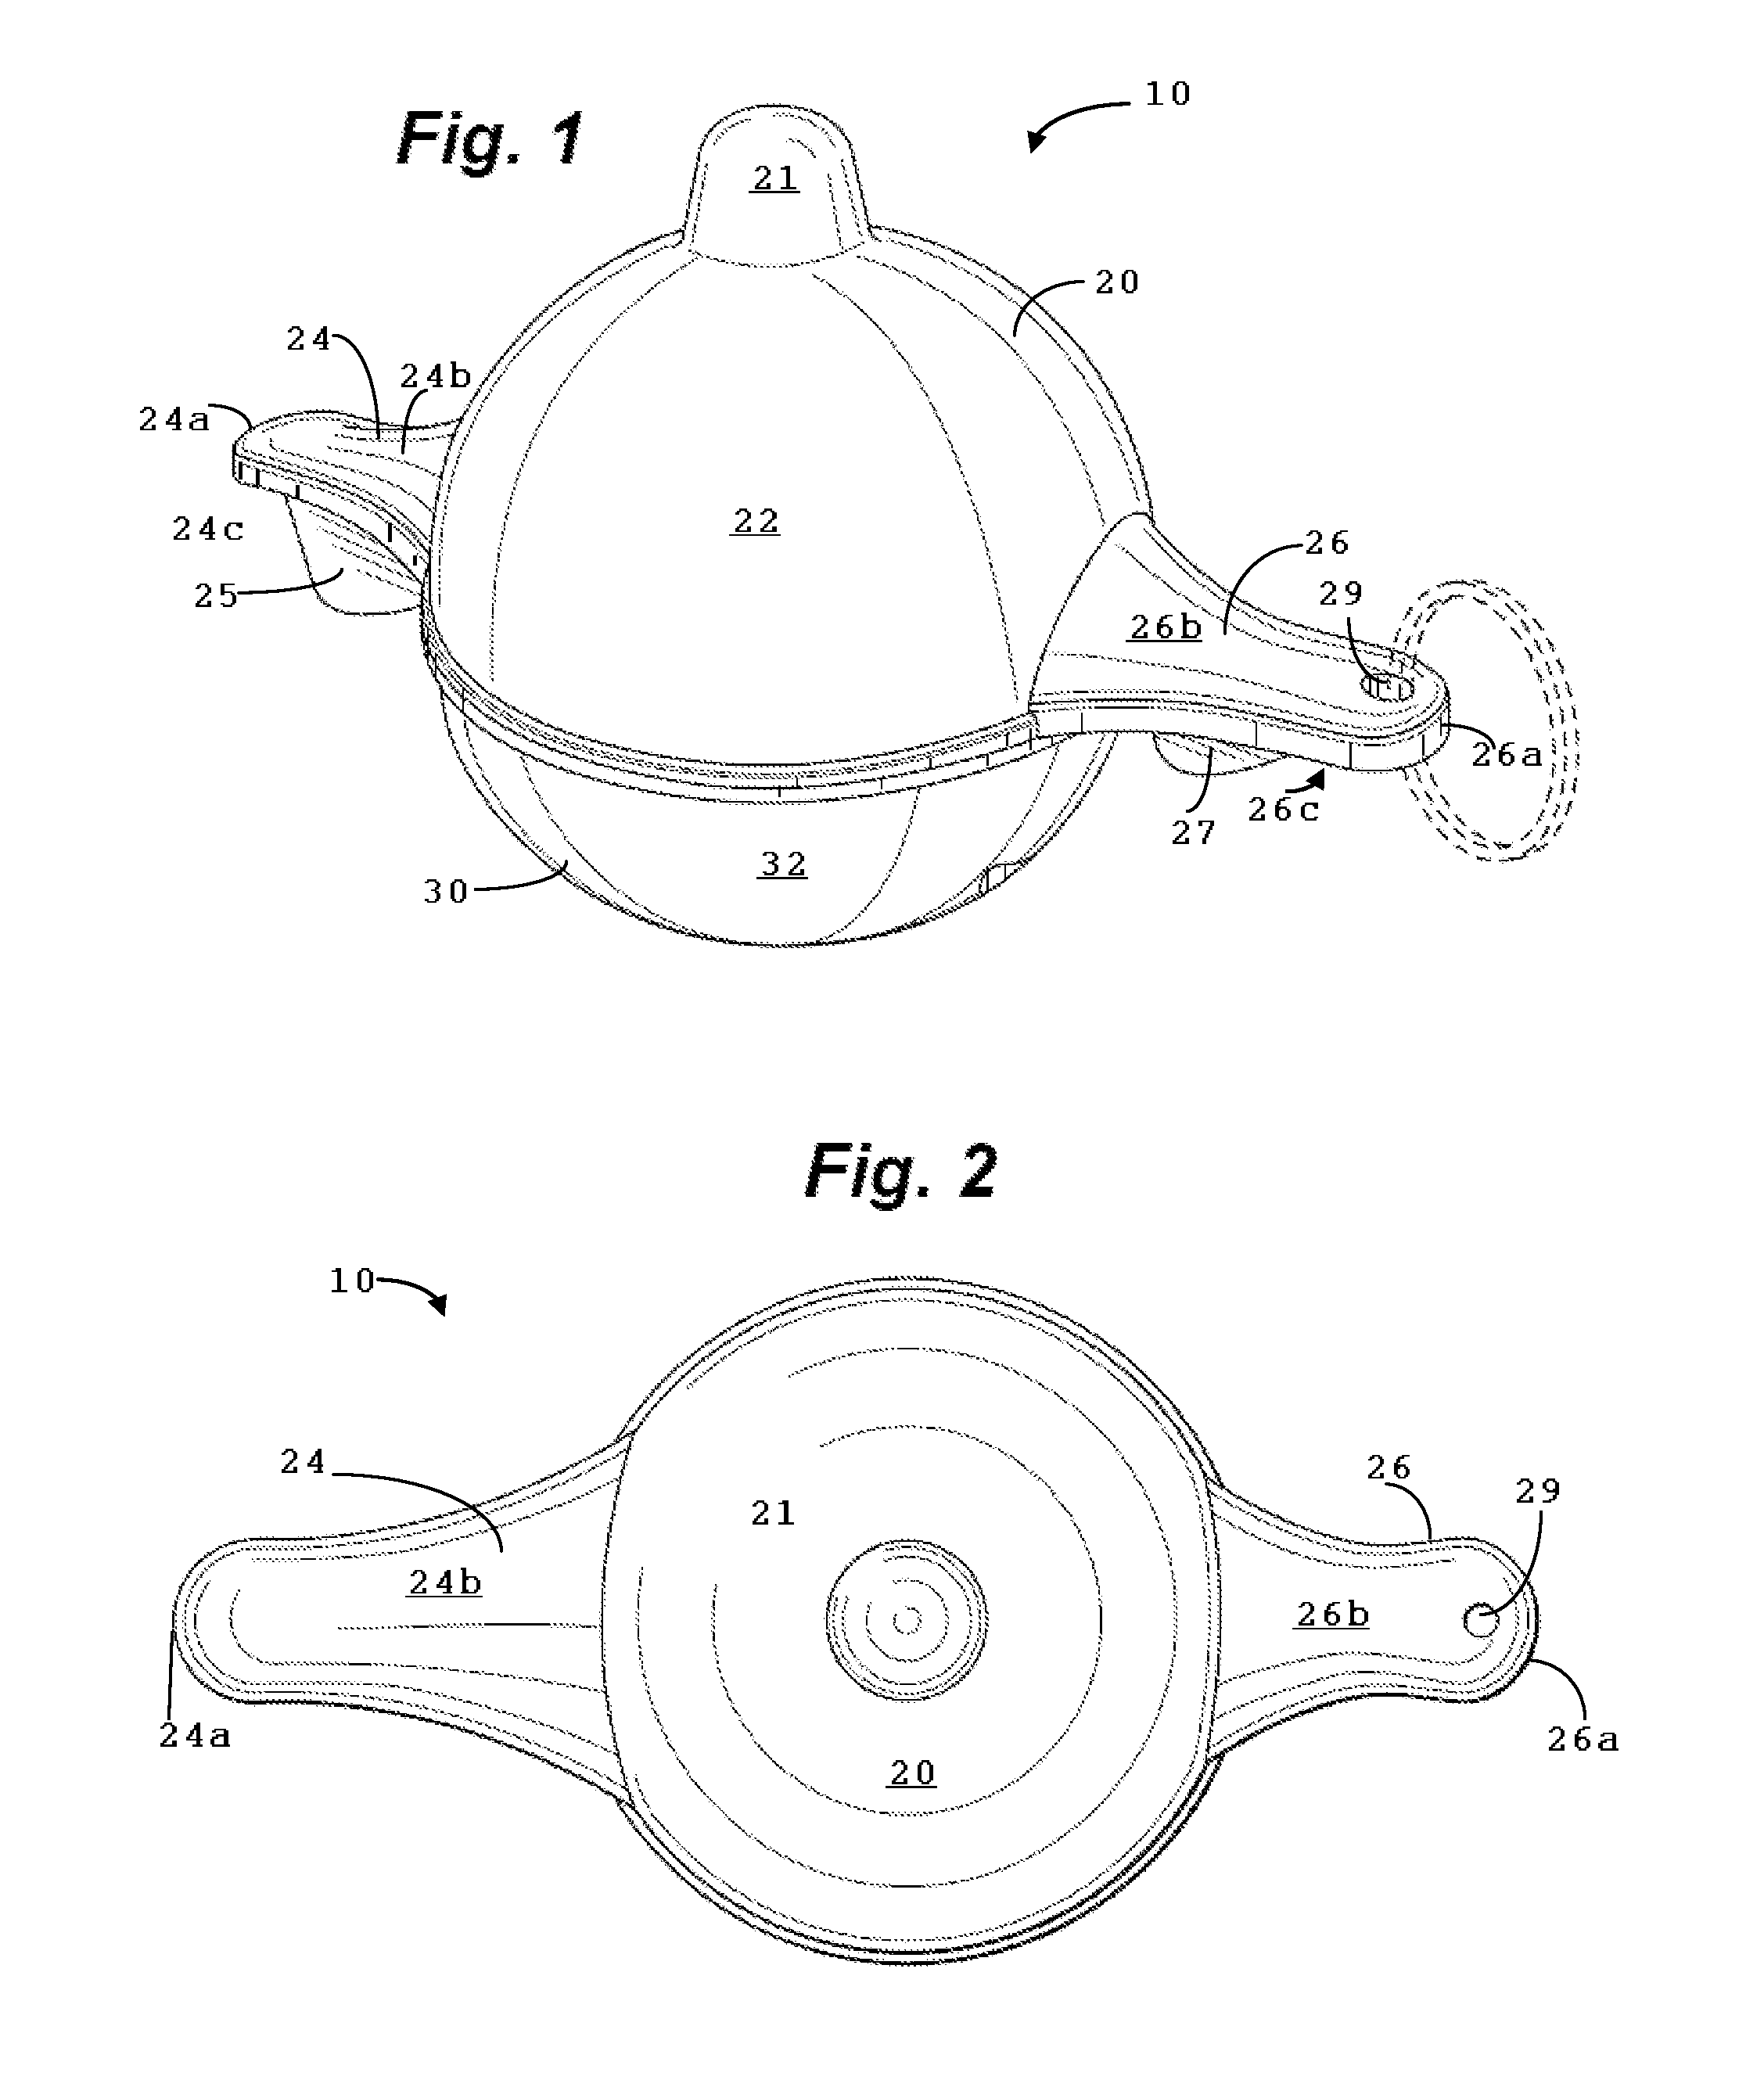 Fish finder device housing and system